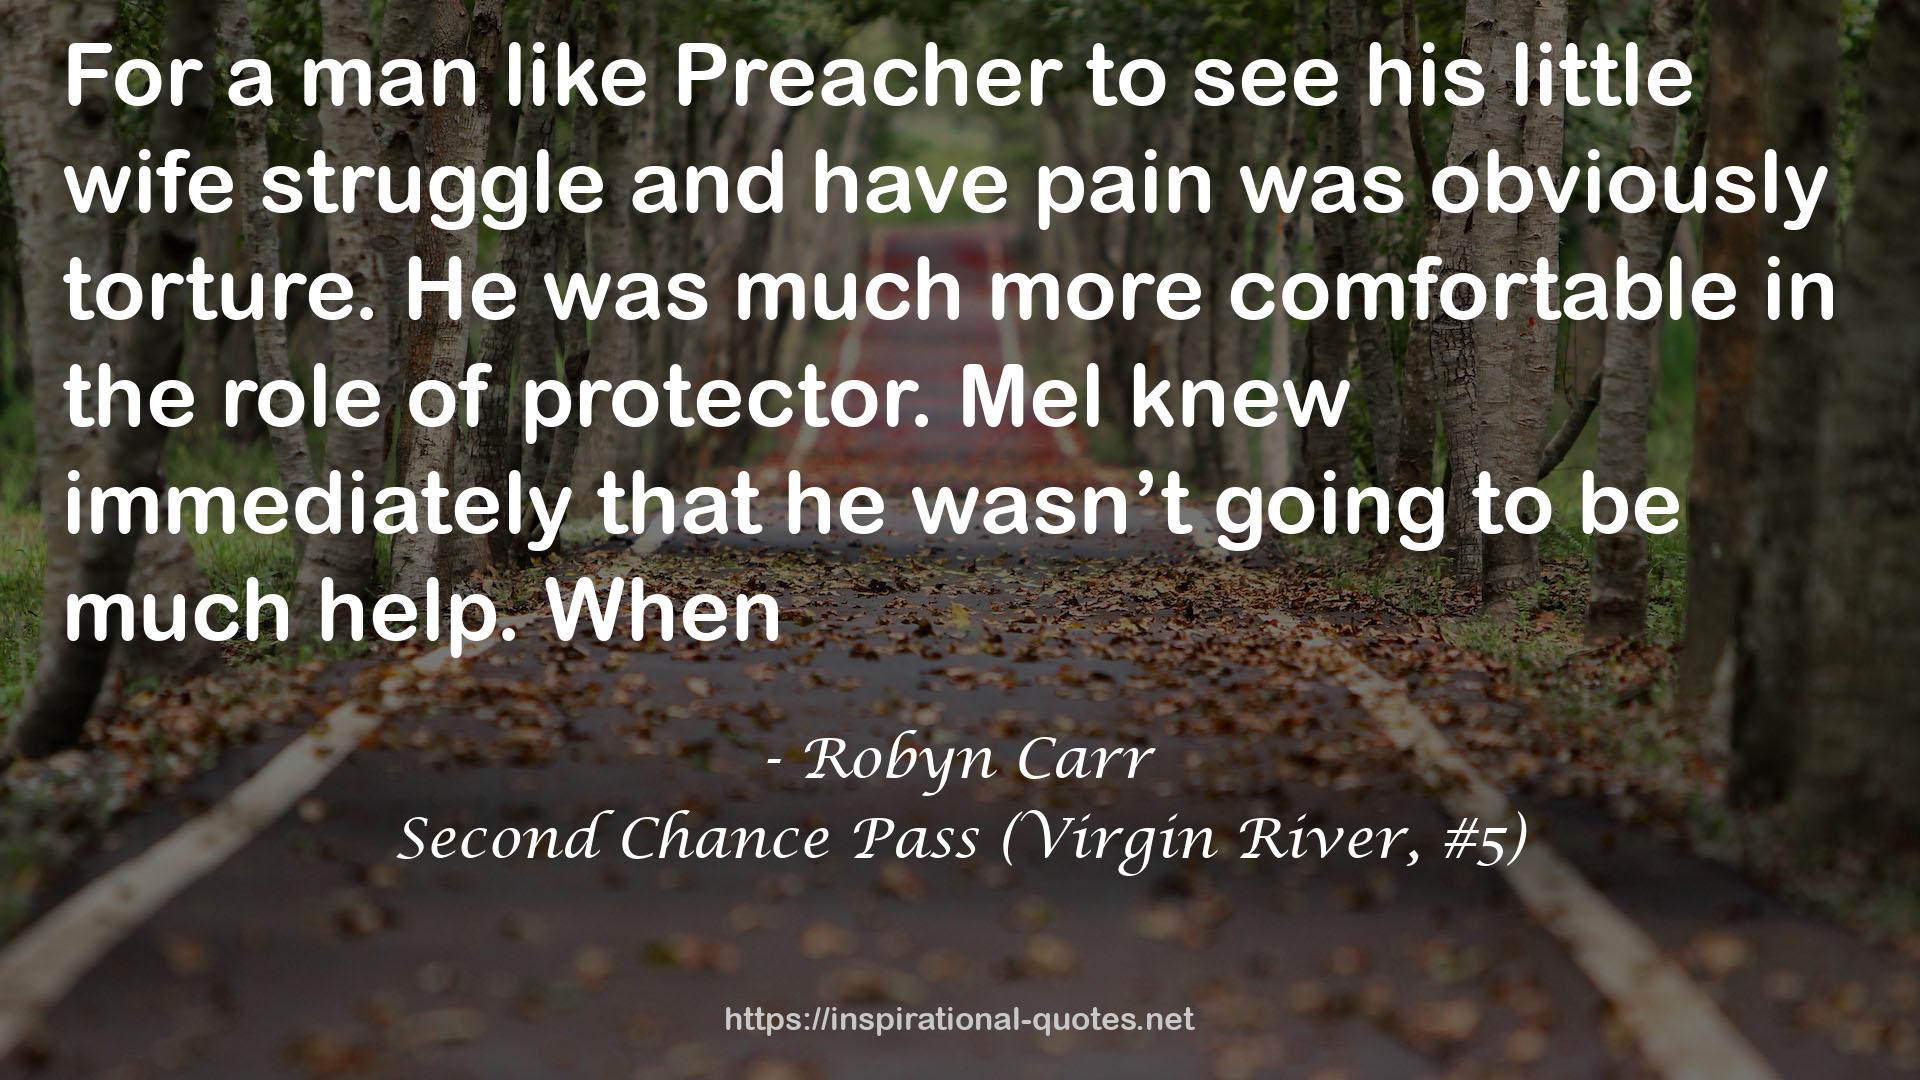 Second Chance Pass (Virgin River, #5) QUOTES